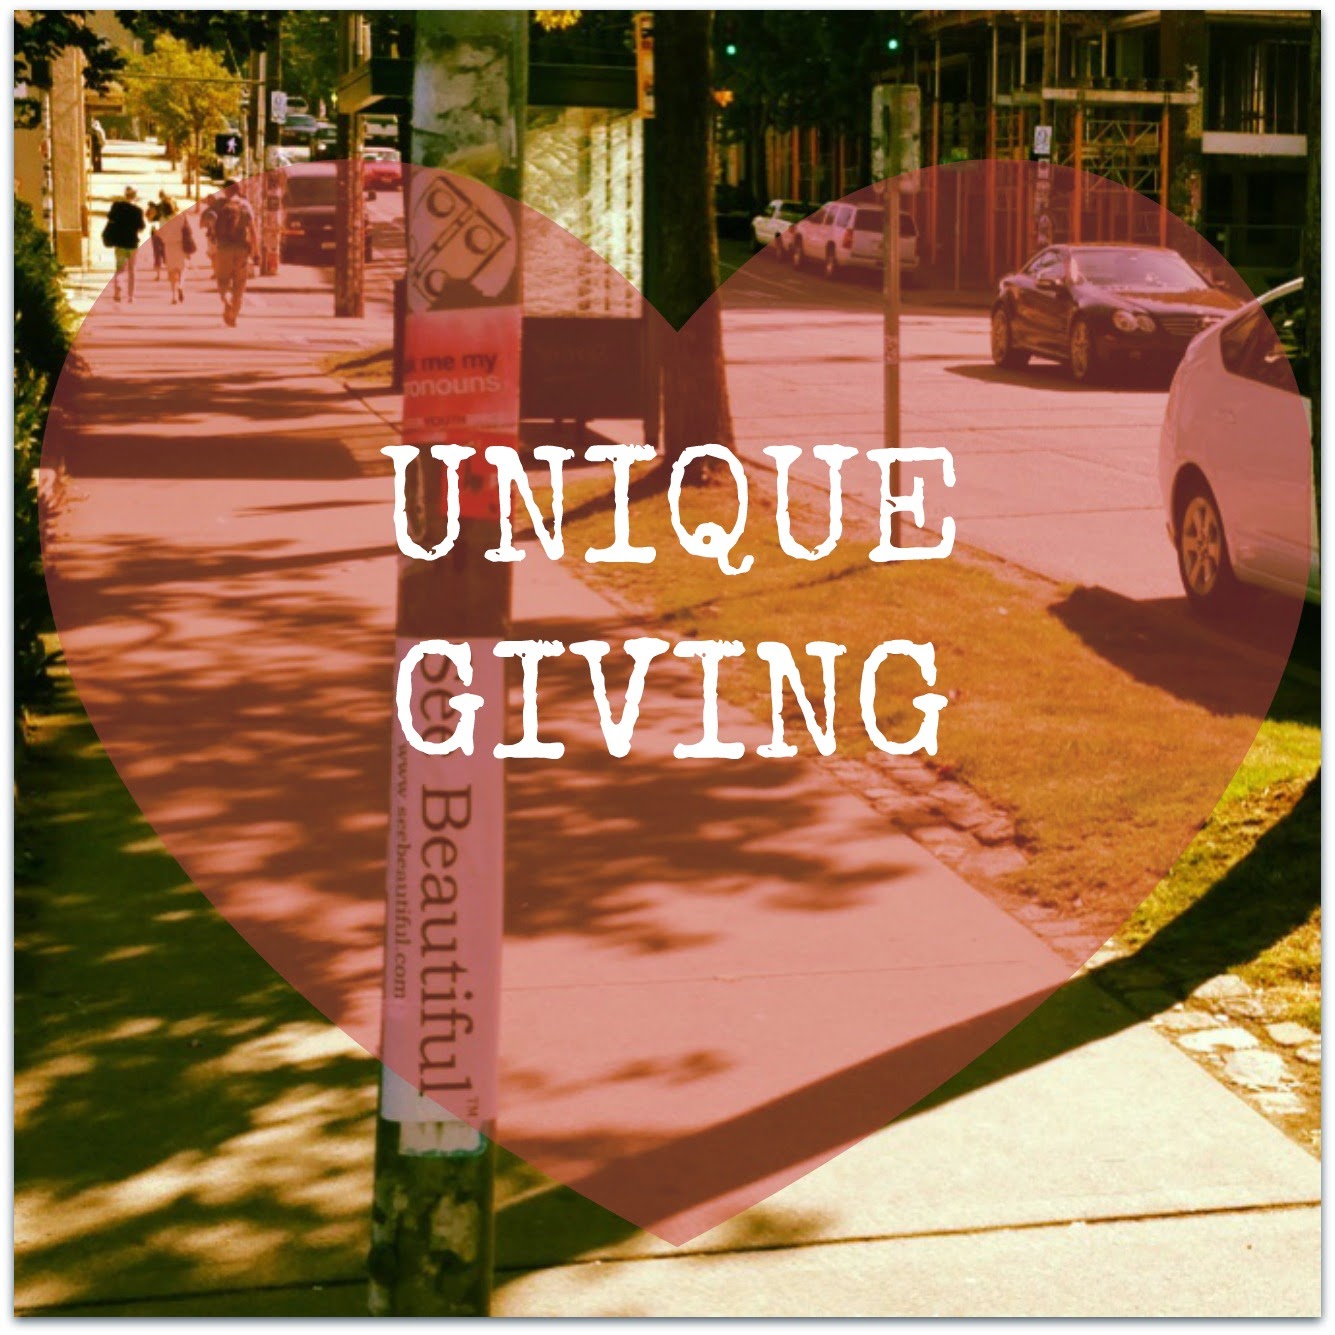 http://www.seebeautiful.com/unique-giving.html